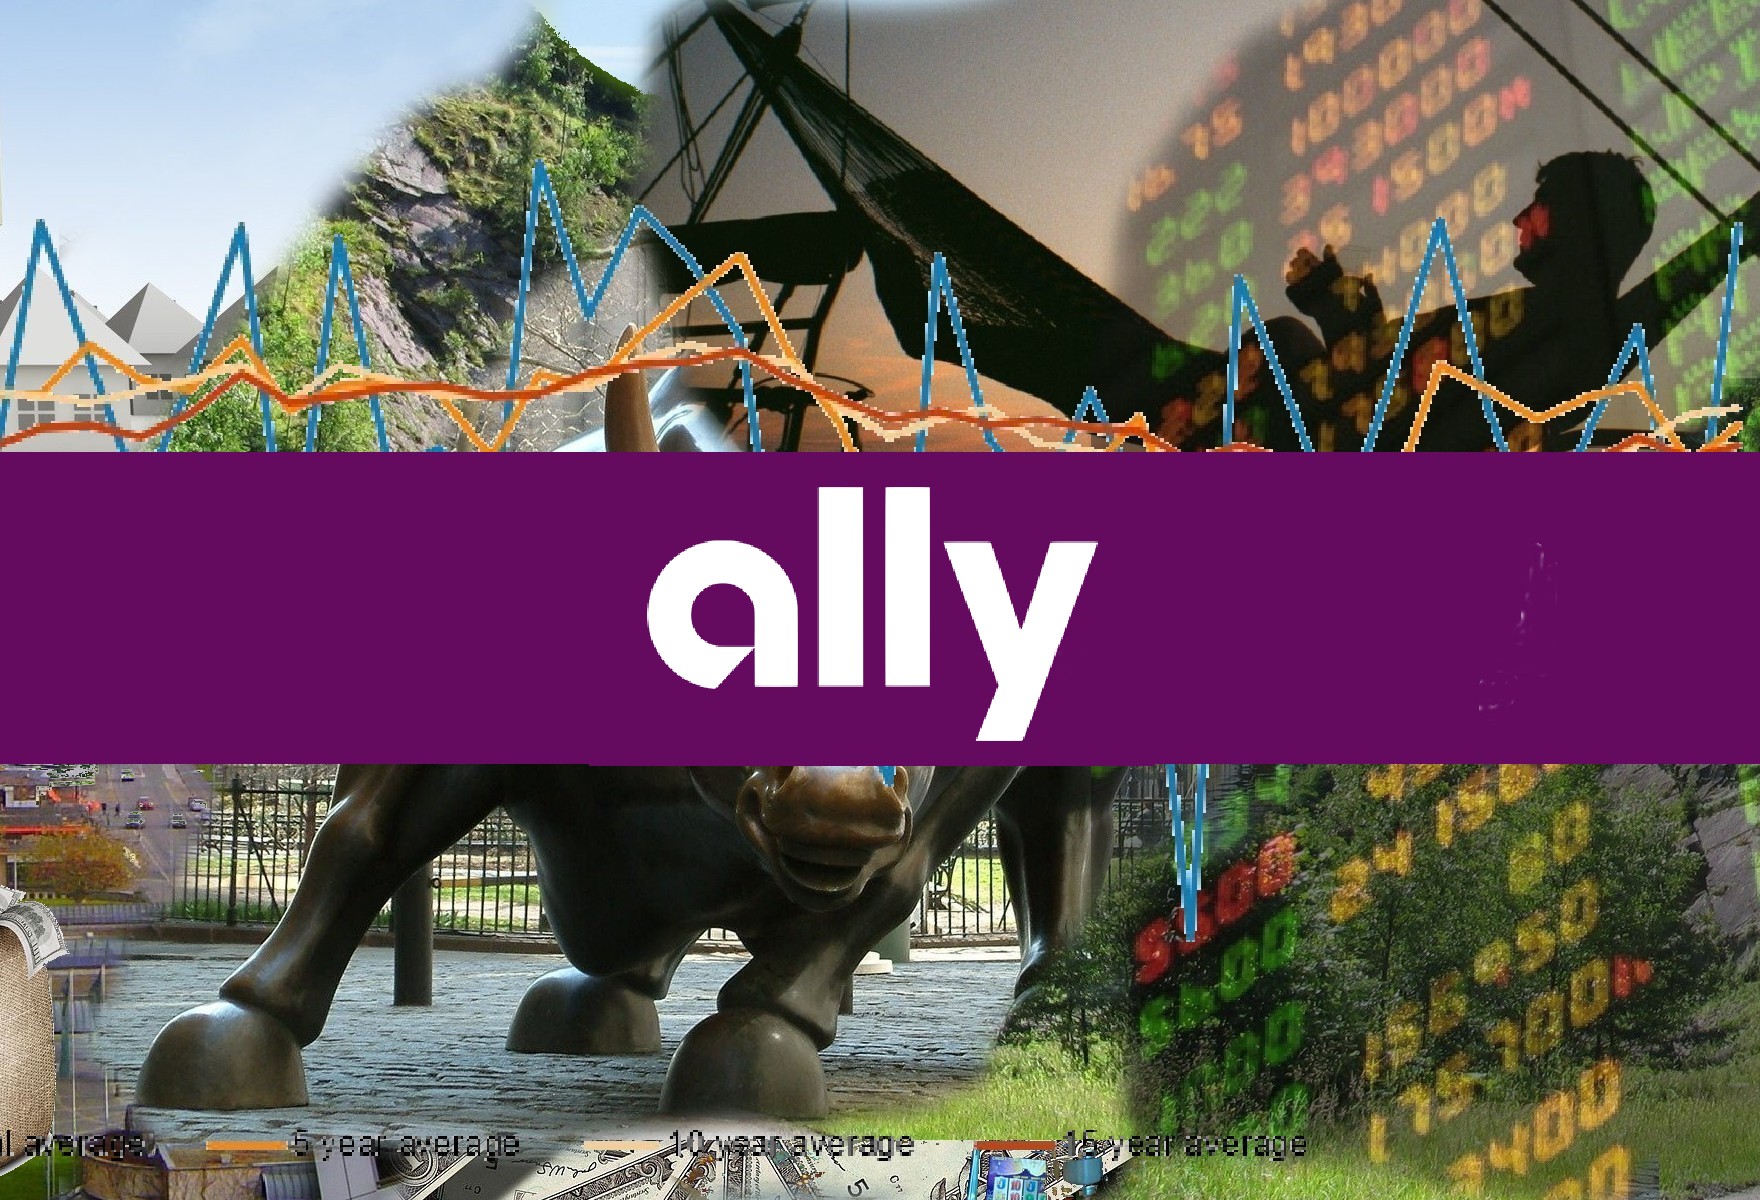 Best trading platform for beginners what about Ally? Bad Investment